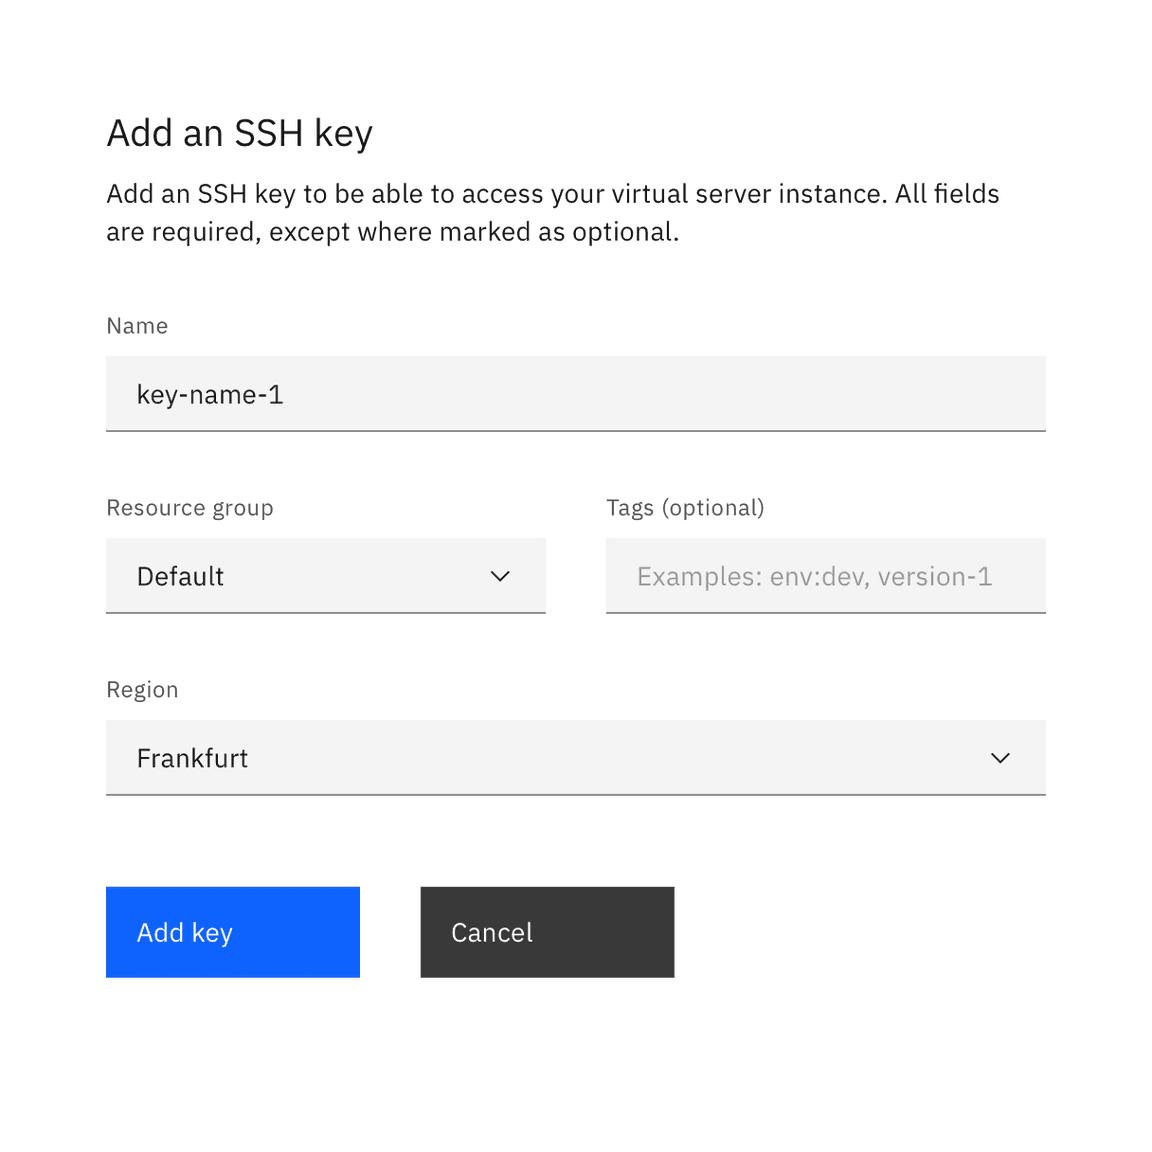 forms - Fixed width for buttons or proportional with the text